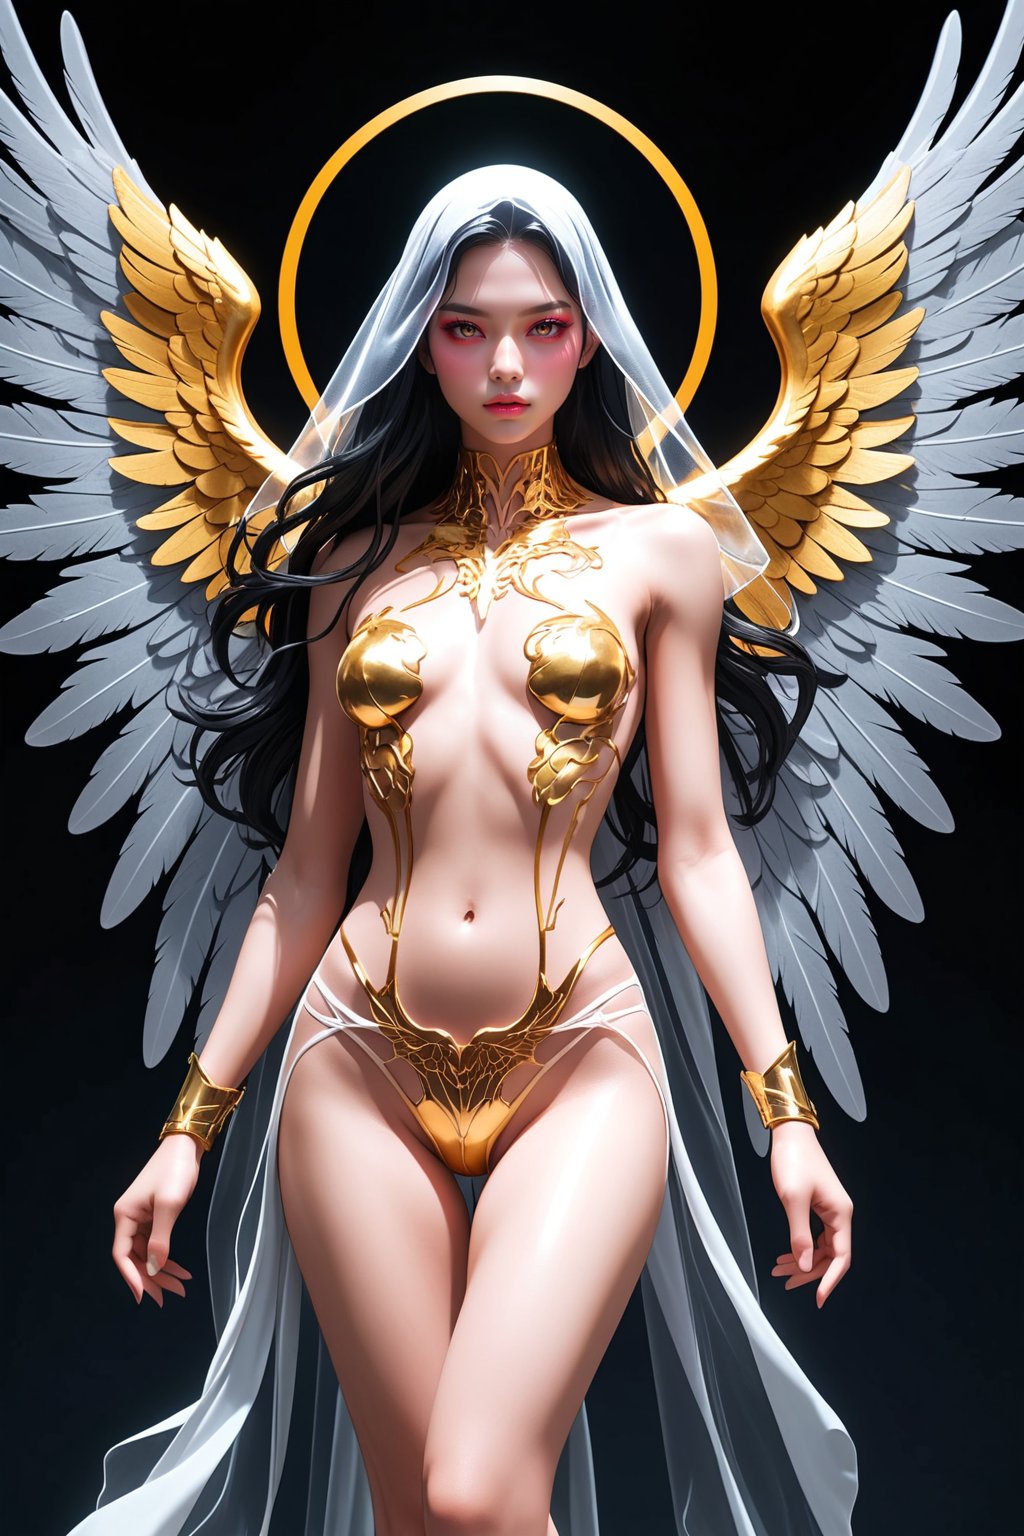 SelectiveColorStyle, 2colorpop gold. A beautiful fallen angel with dark tattered wings, wearing nothing but a thin transparent veil. Highly detailed with insane quality in an anime style.